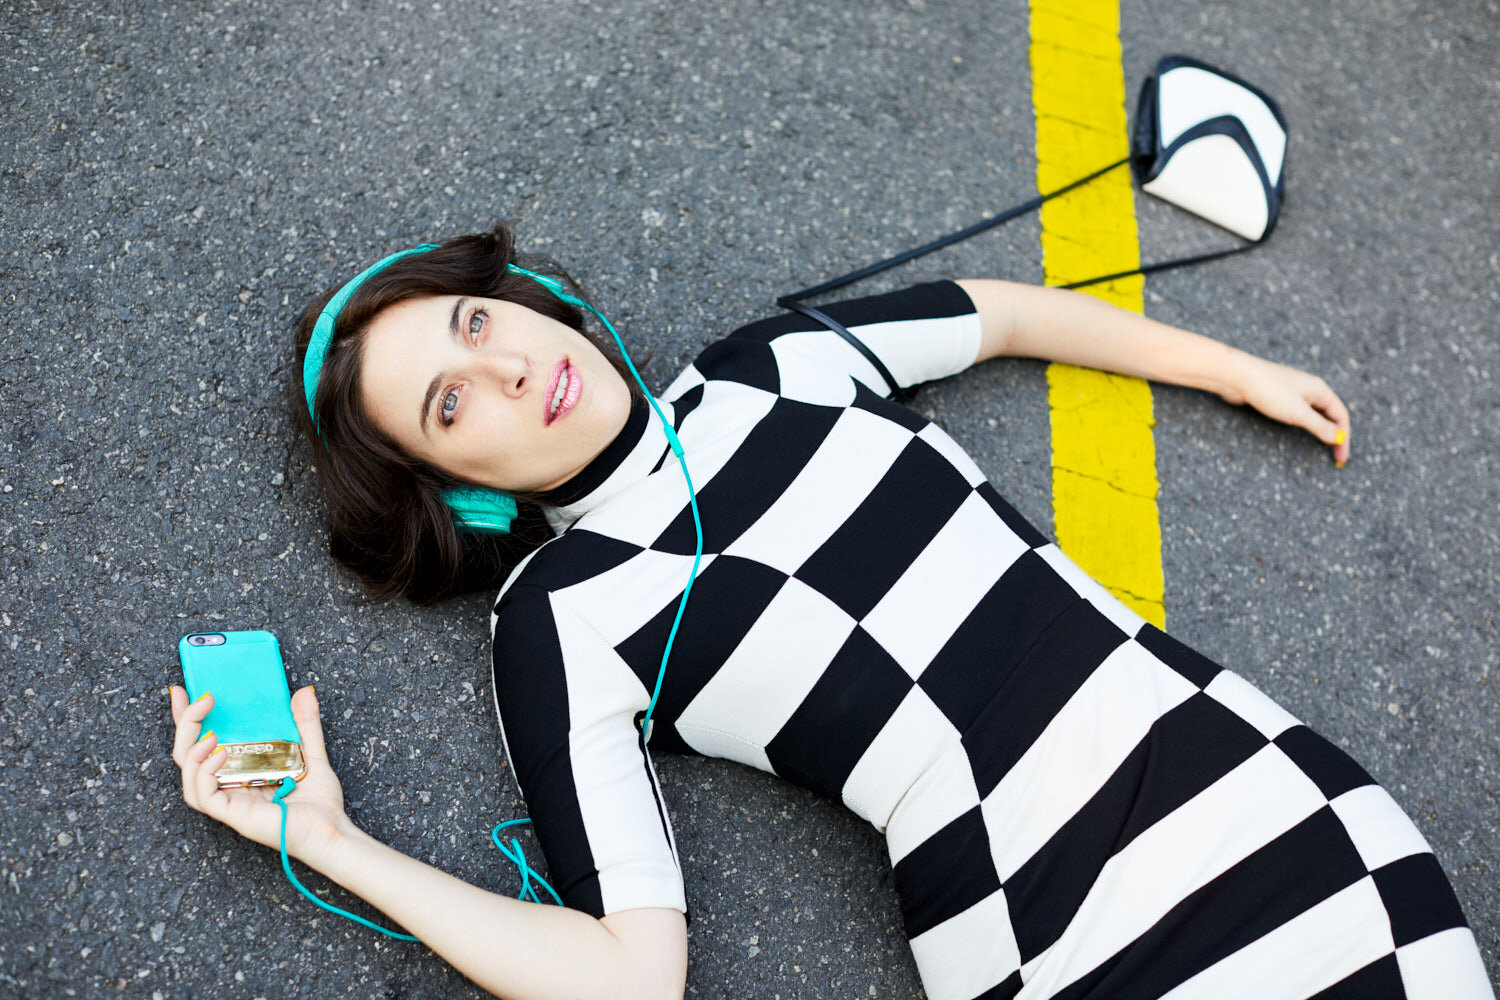 musician Janna Pelle lays in road for her Hit and Run album art promotional photo by portrait photographer Hanna Agar 